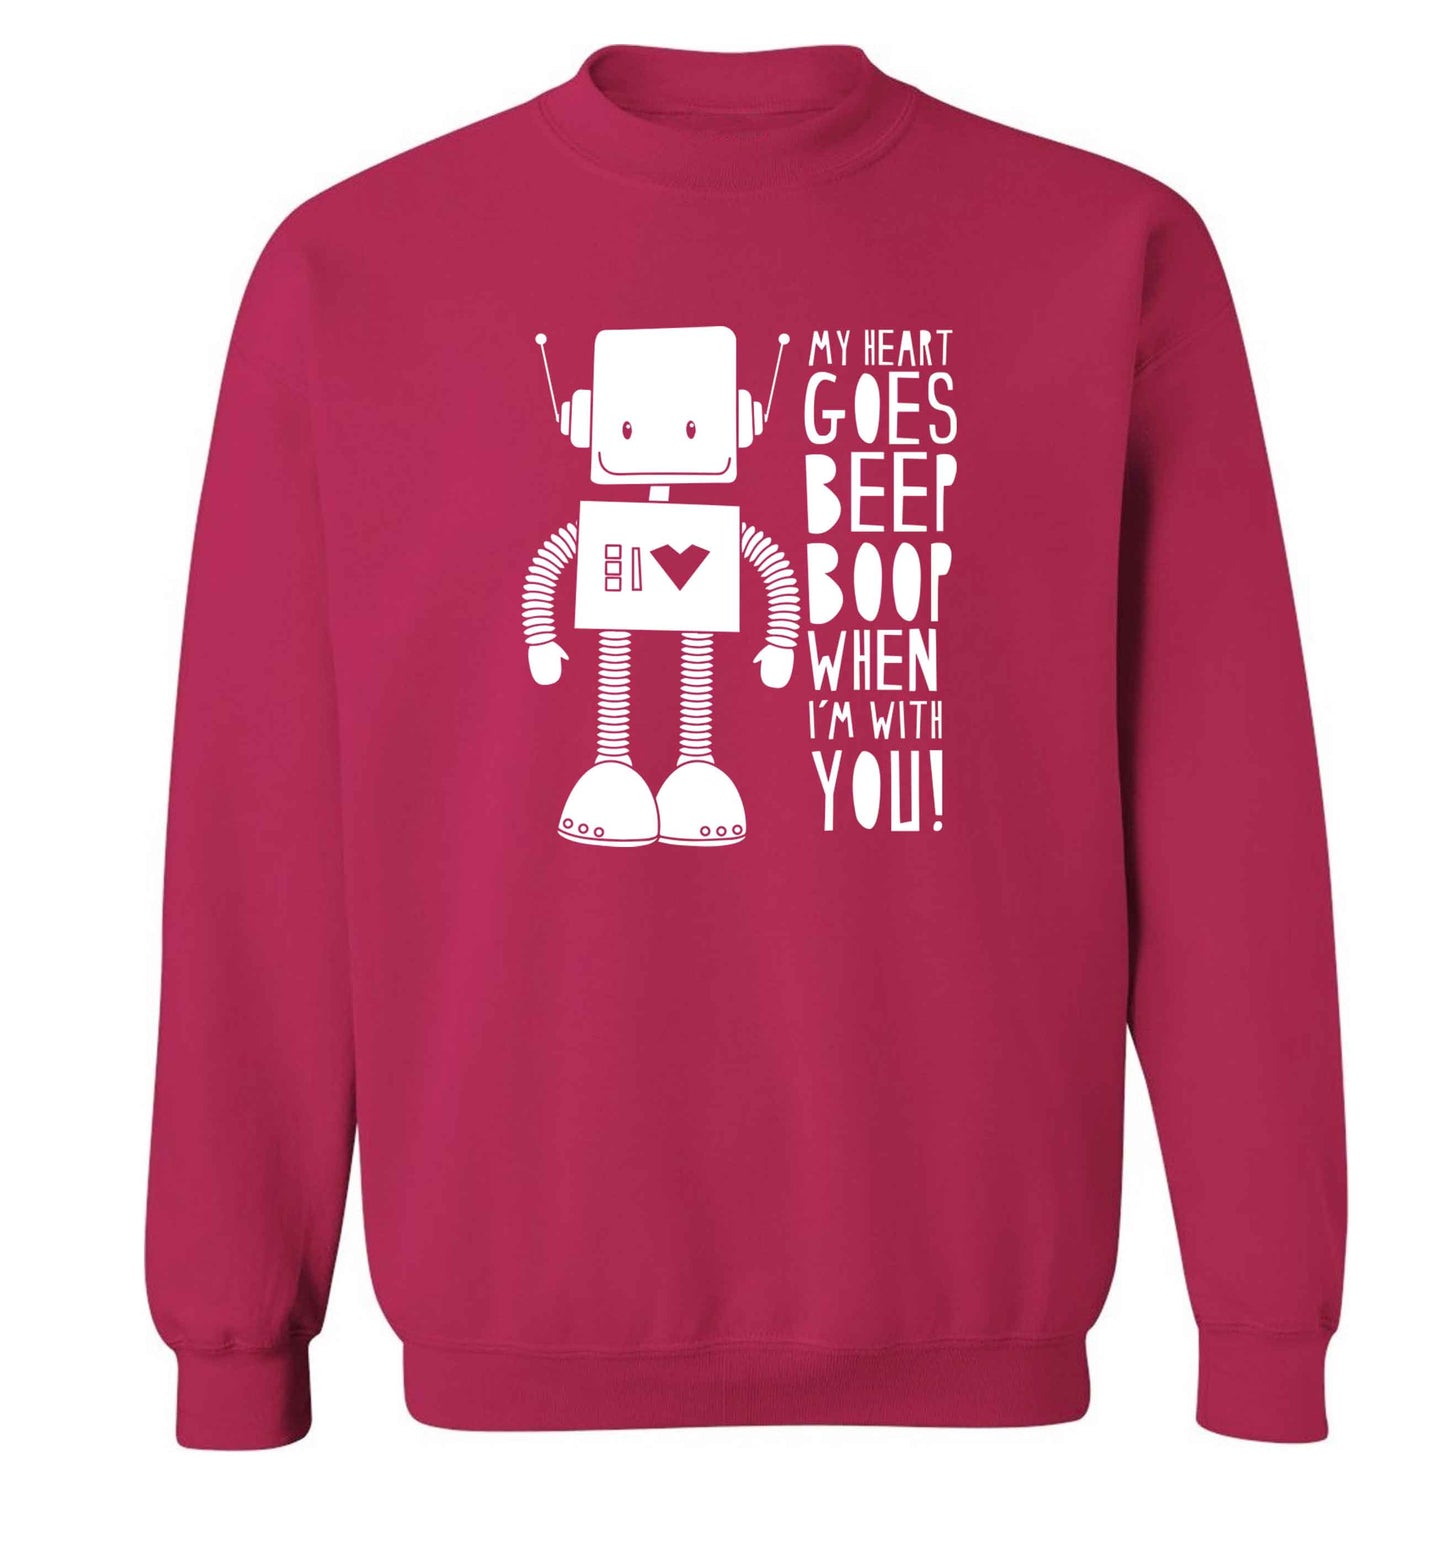 My heart goes beep boop when I'm with you adult's unisex pink sweater 2XL